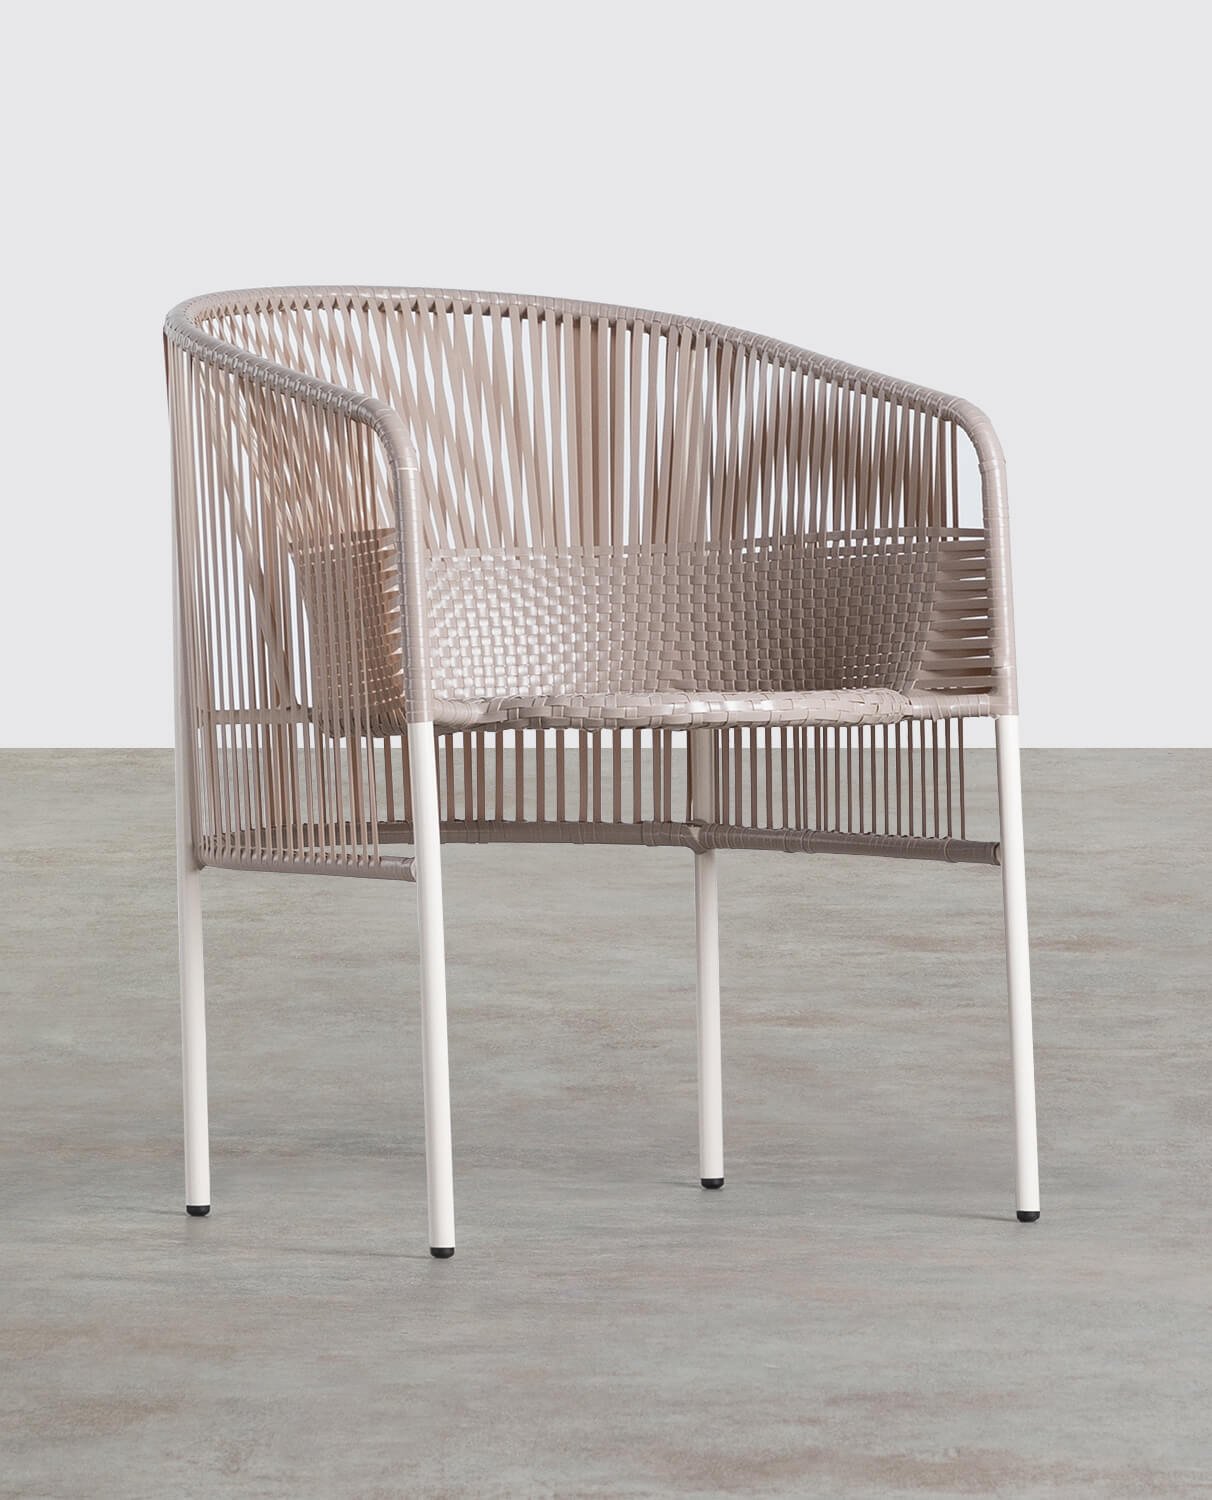 Rattan and Steel Outdoor Chair Orka Trend, gallery image 1